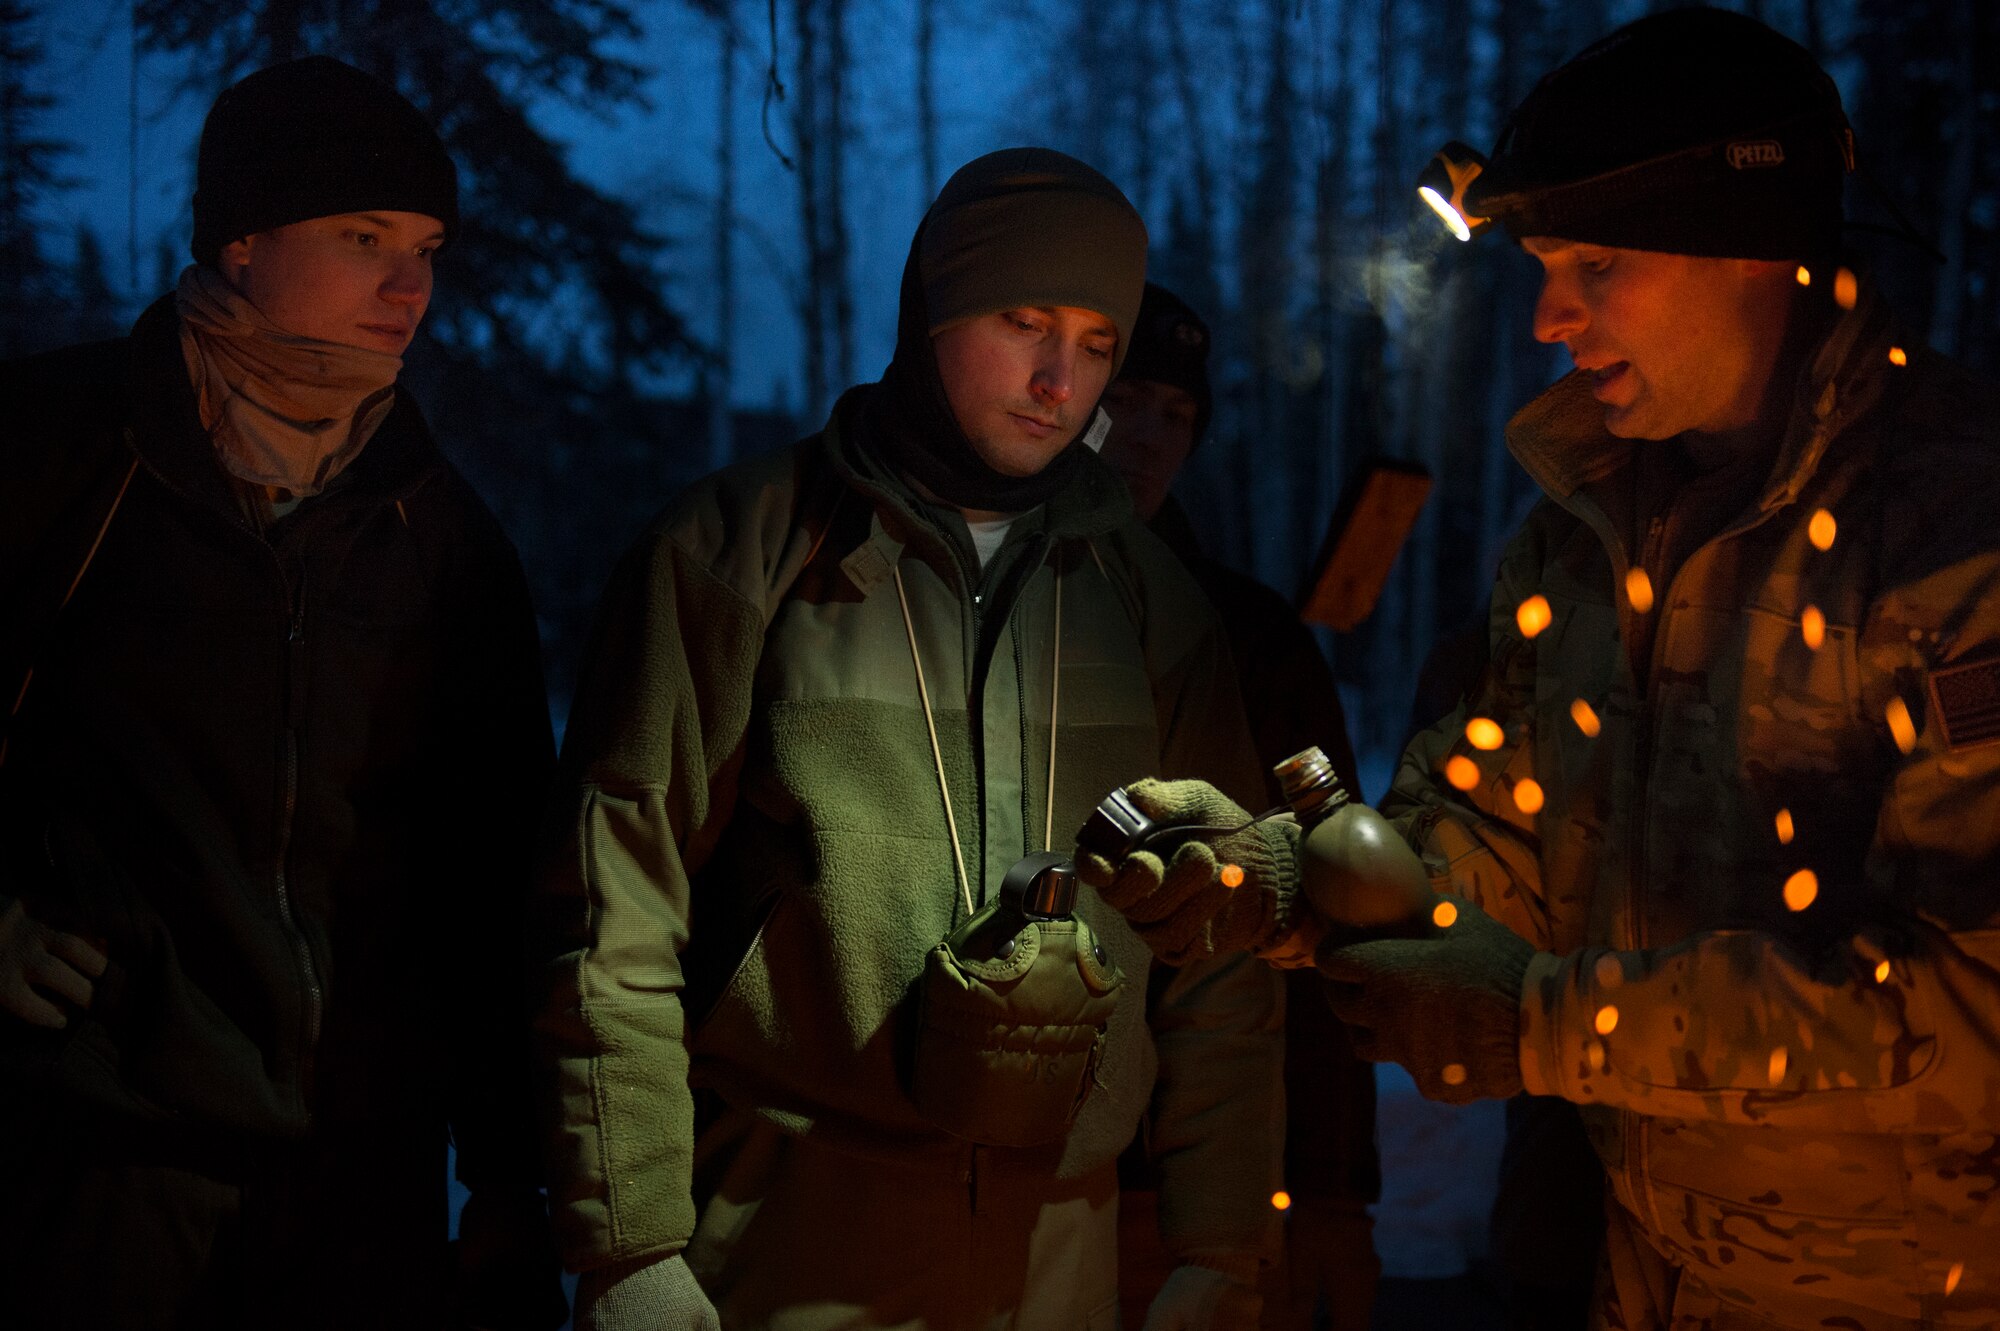 Alaska Airmen teach others to survive Arctic conditions